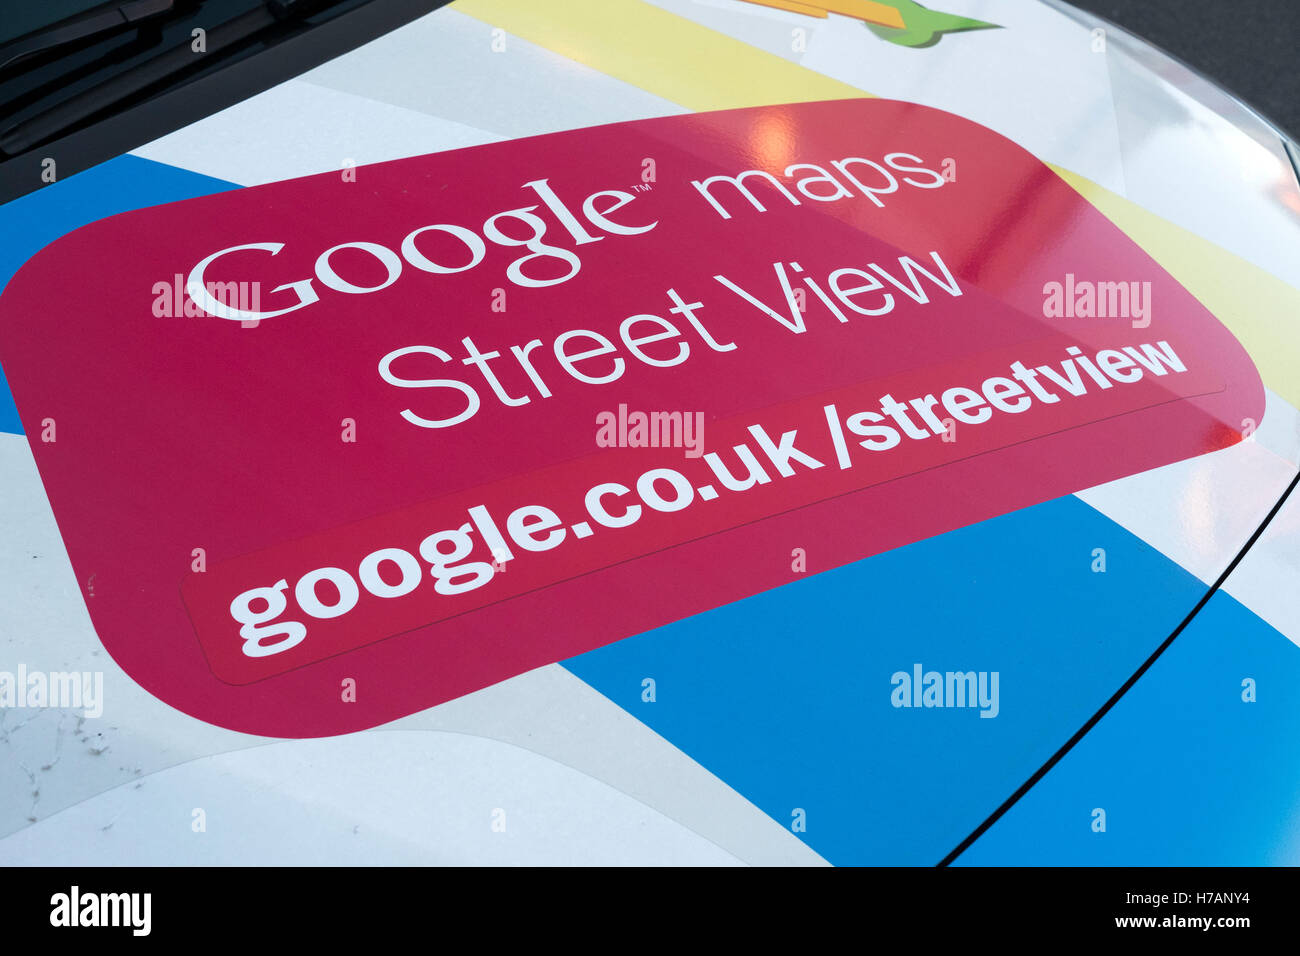 A Google Street View vehicle used for mapping streets throughout the world, Blackpool, Lancashire, UK. Stock Photo